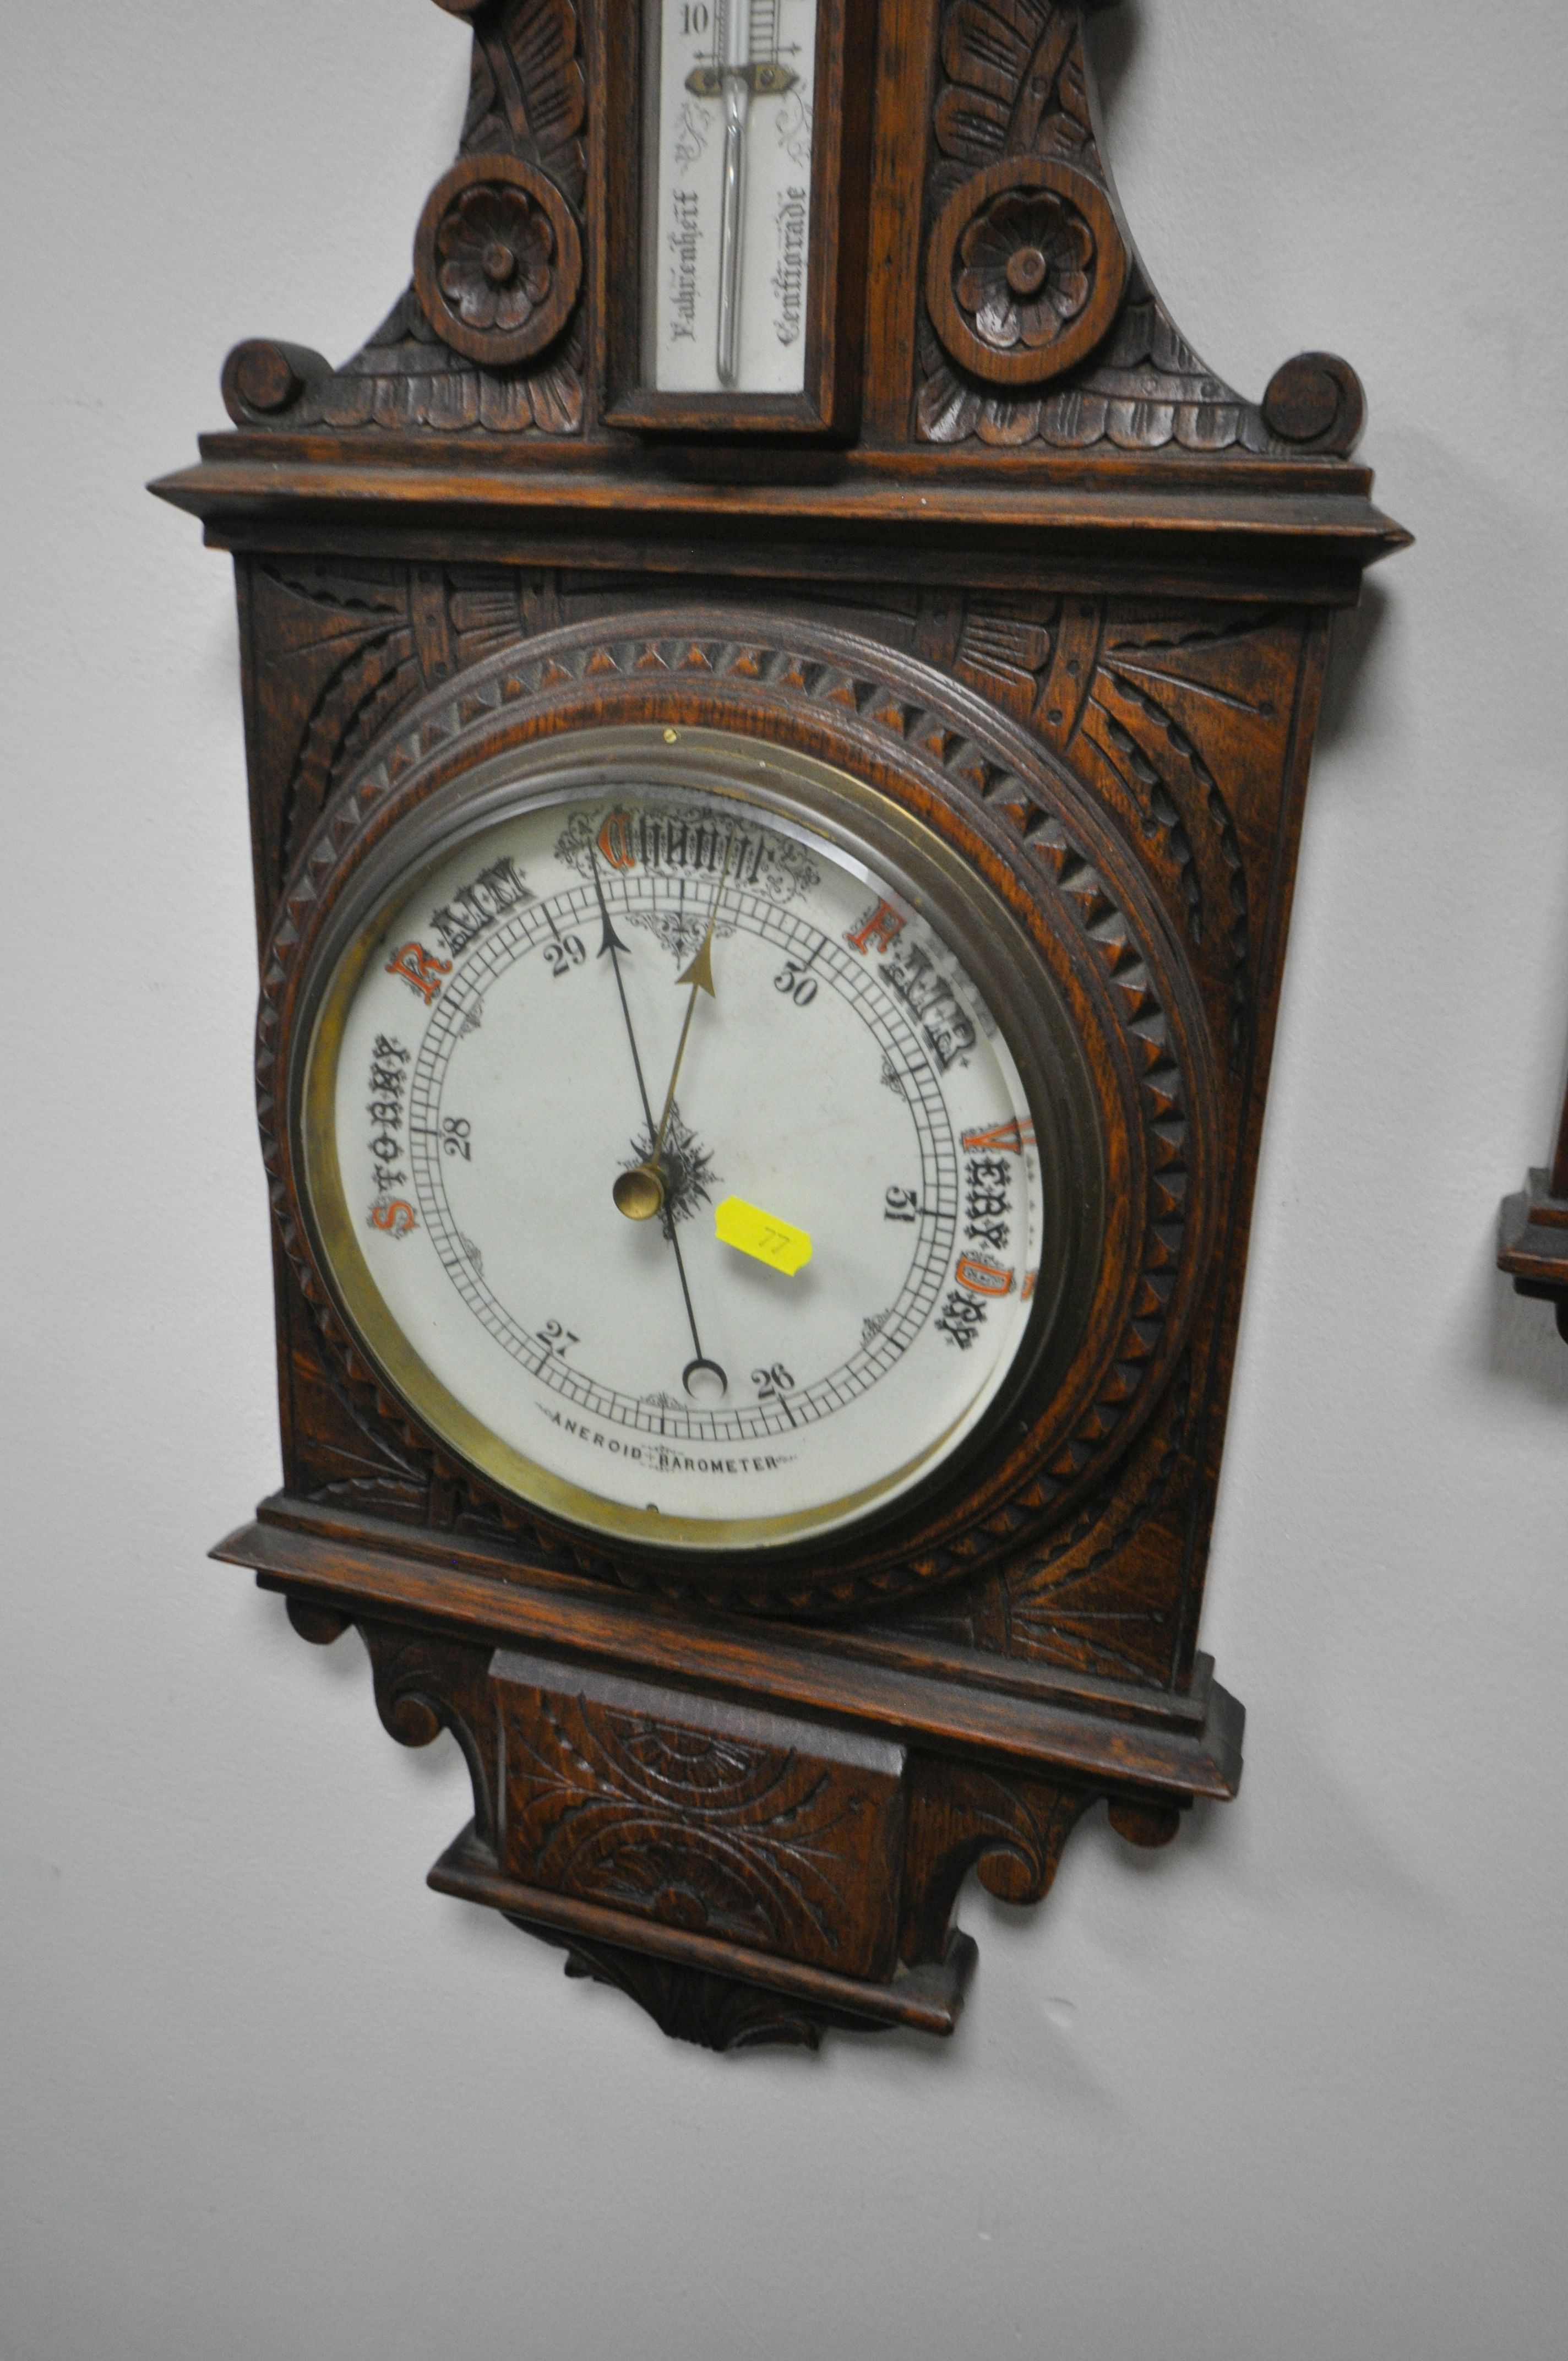 TWO LATE 19TH/EARLY 20TH CENTURY CARVED OAK ANEROID BAROMETERS, with clock dials and thermometers, - Image 3 of 5